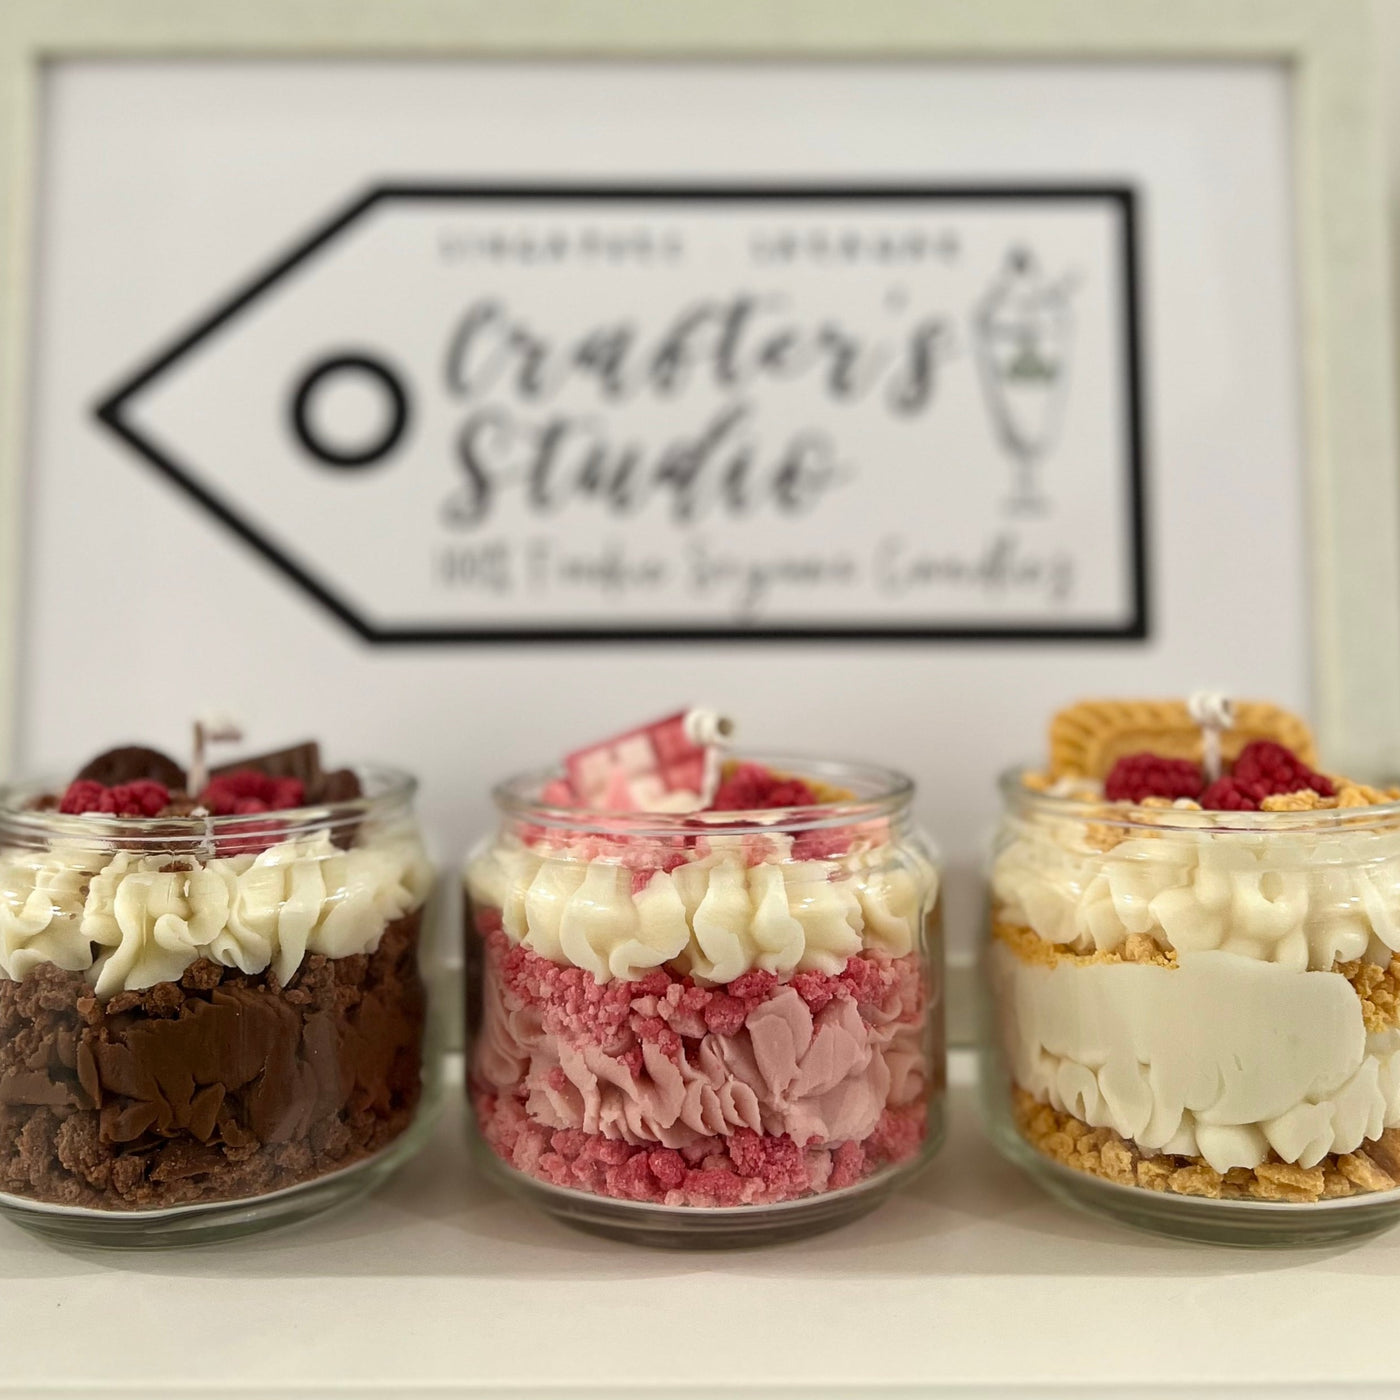 Dessert Candle Making: Workshop with Crafter's Studio